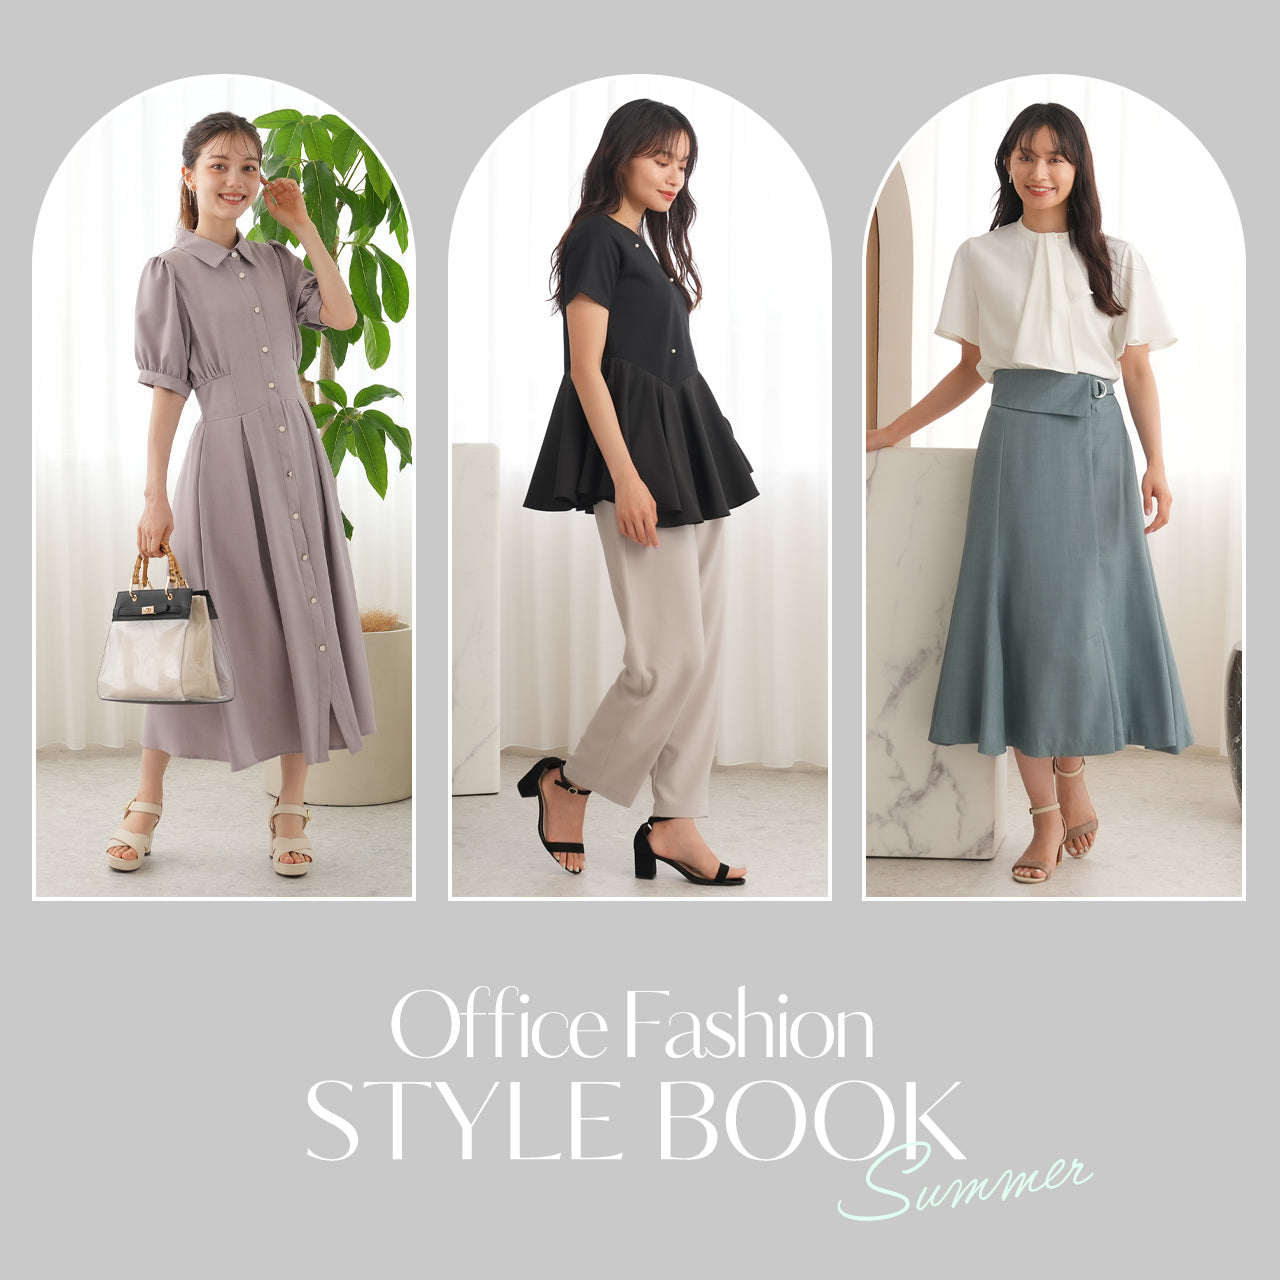 Office Fashion STYLE BOOK